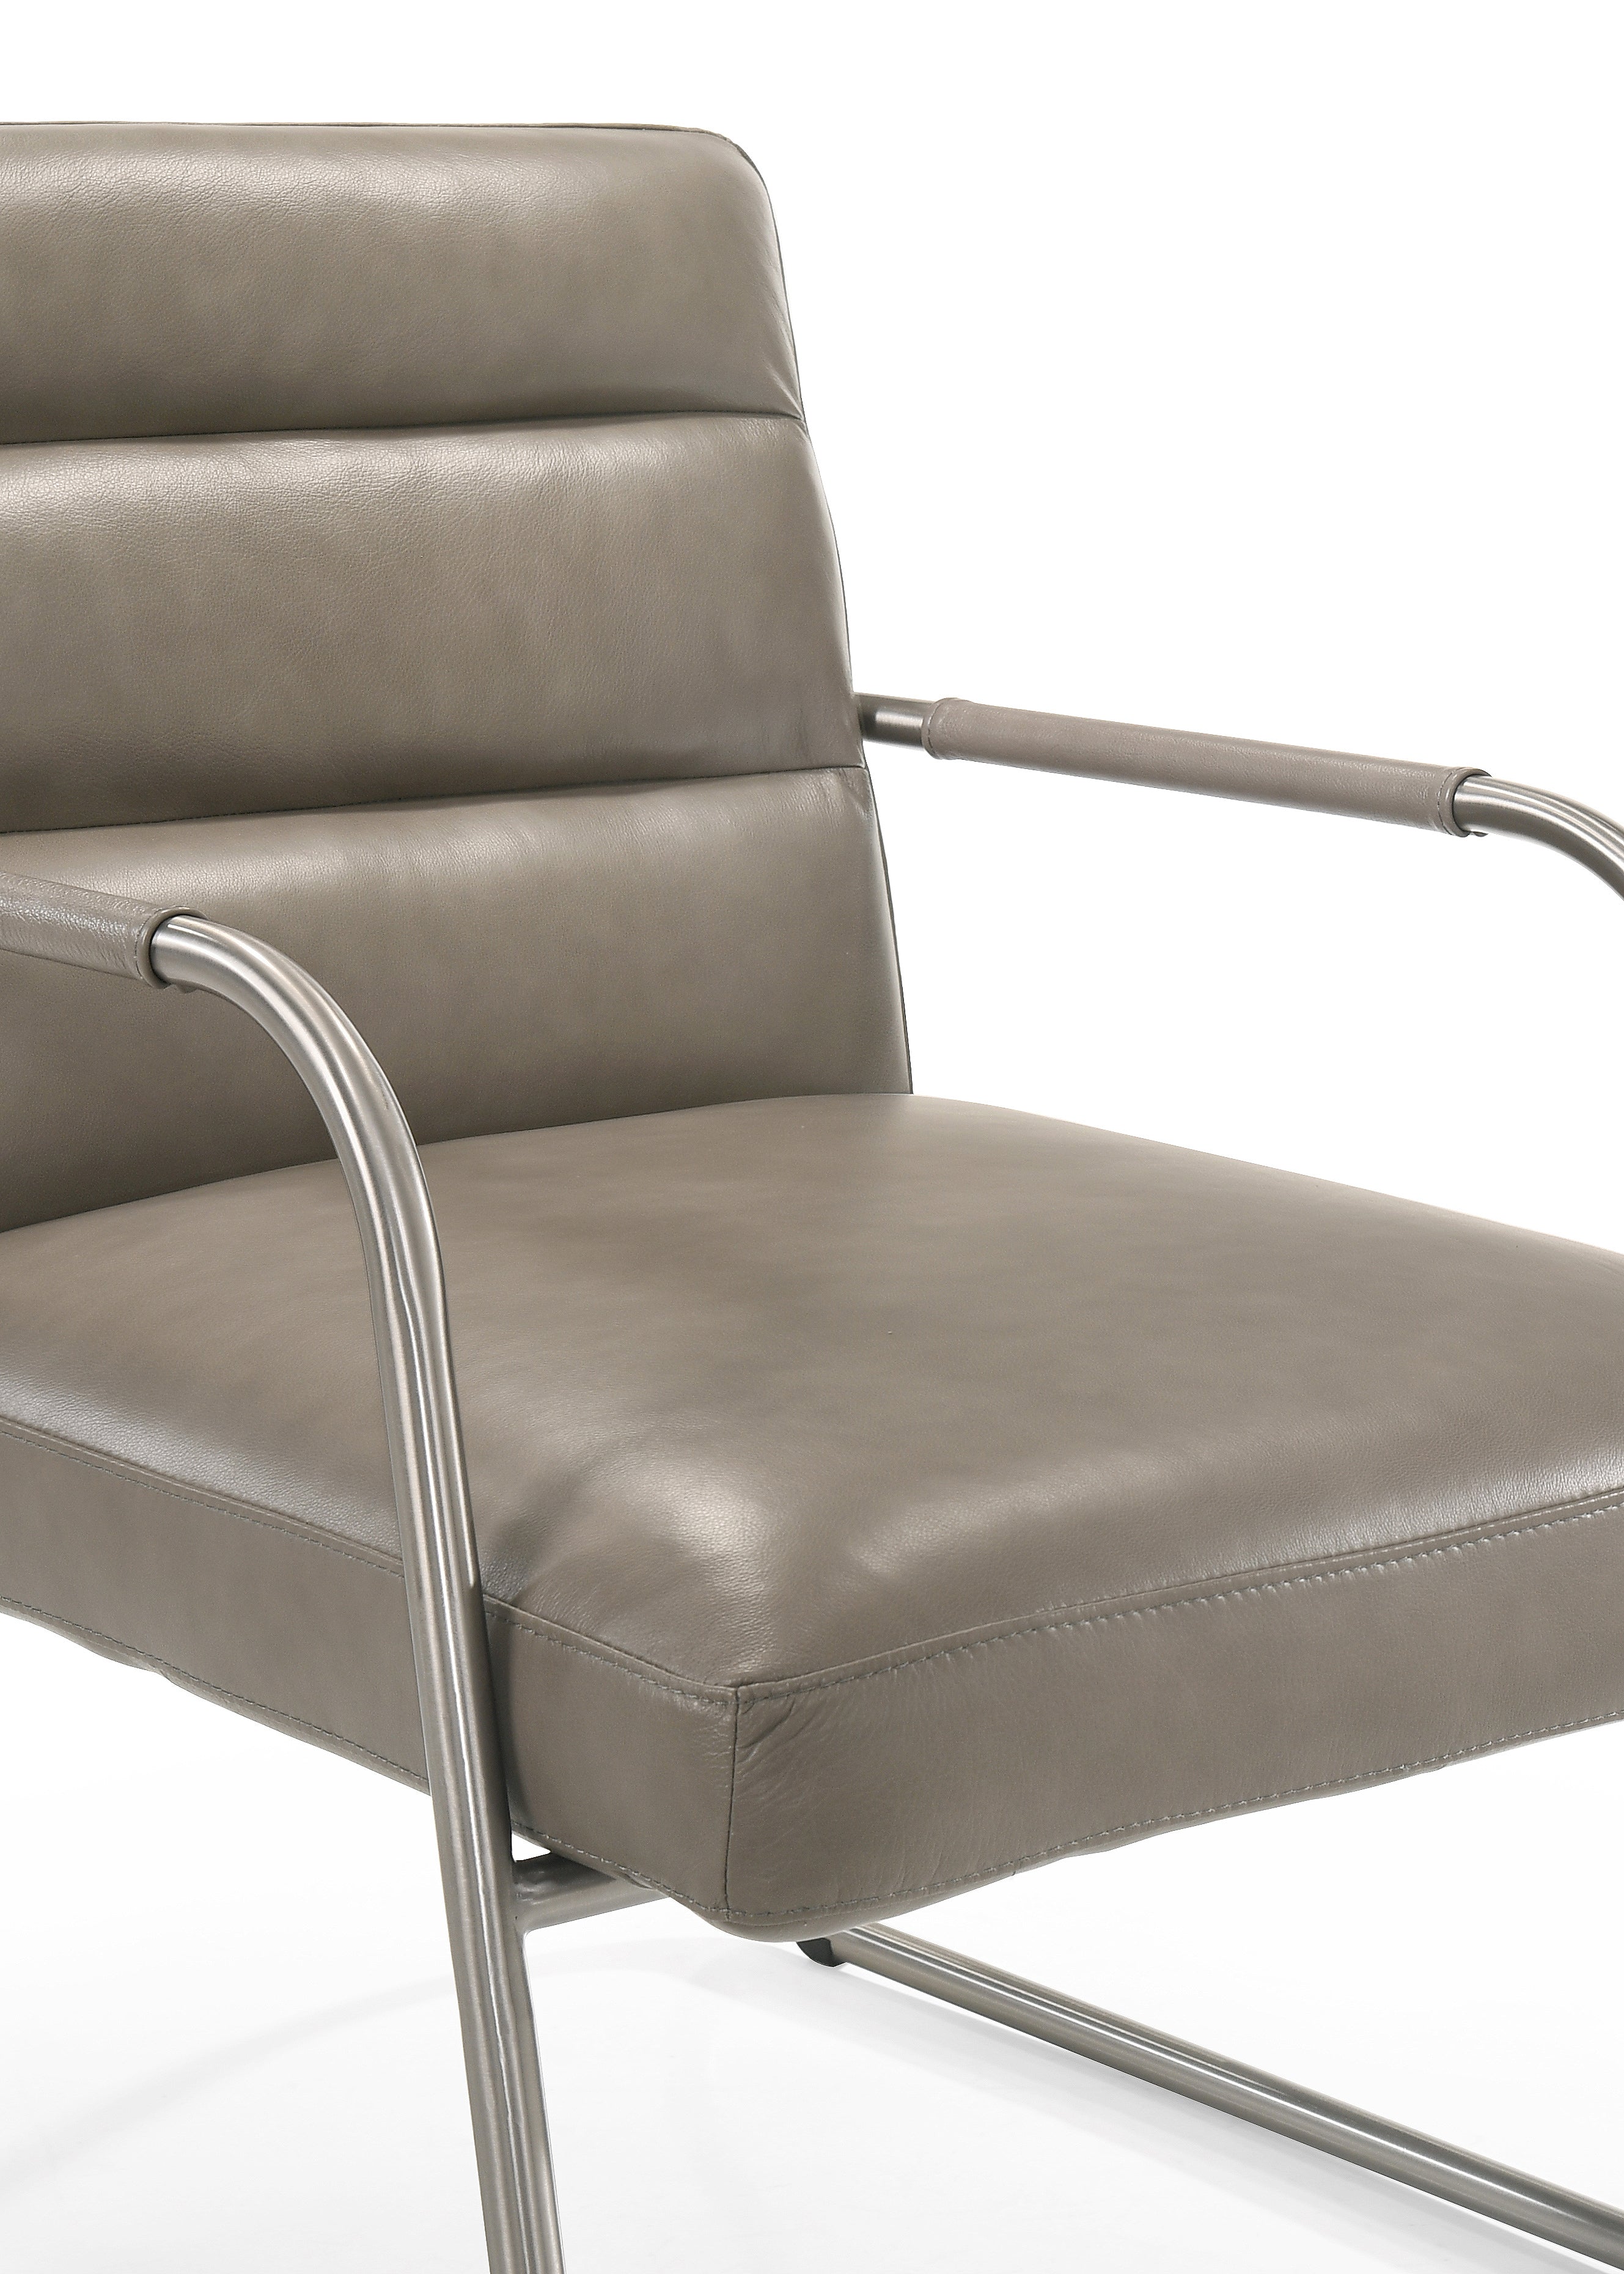 Spencer Stainless Steel Leather Lounge Accent Chair, Grey